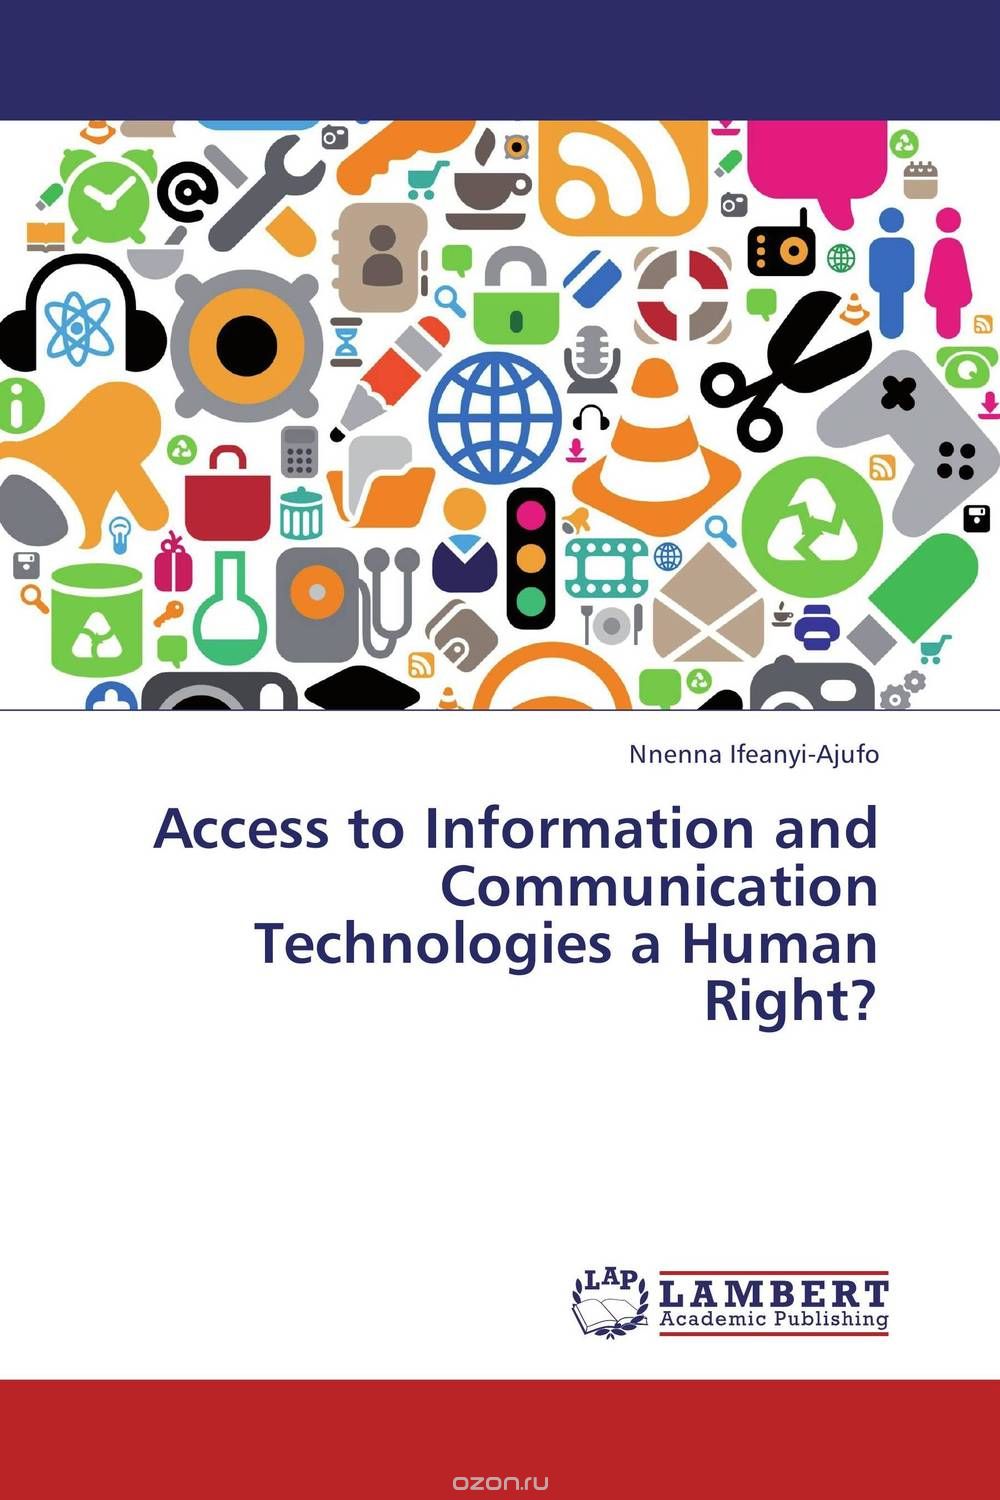 Access to Information and Communication Technologies a Human Right?